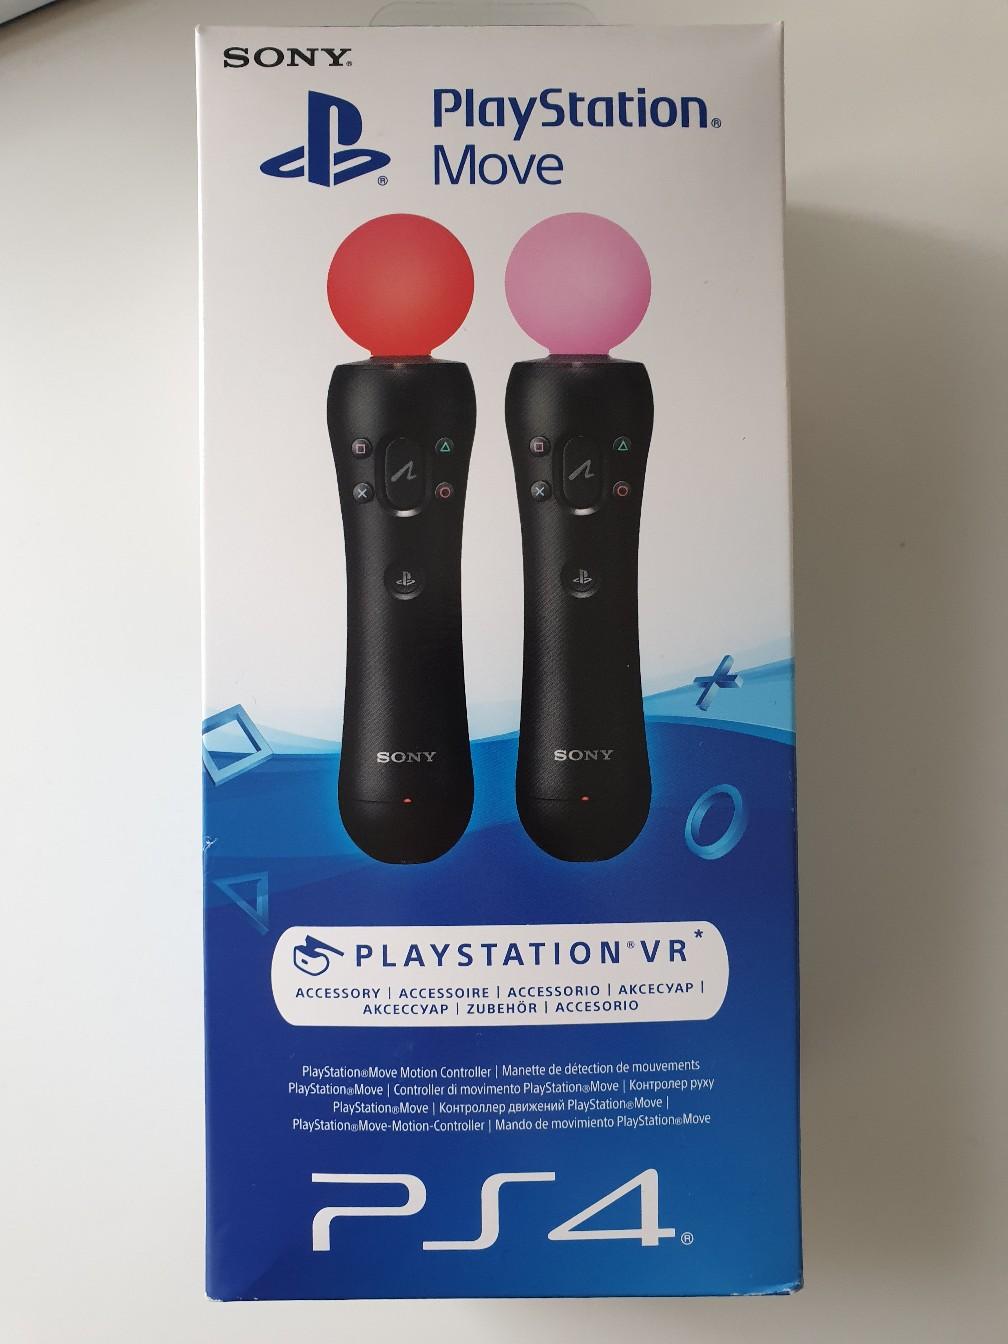 move motion controller